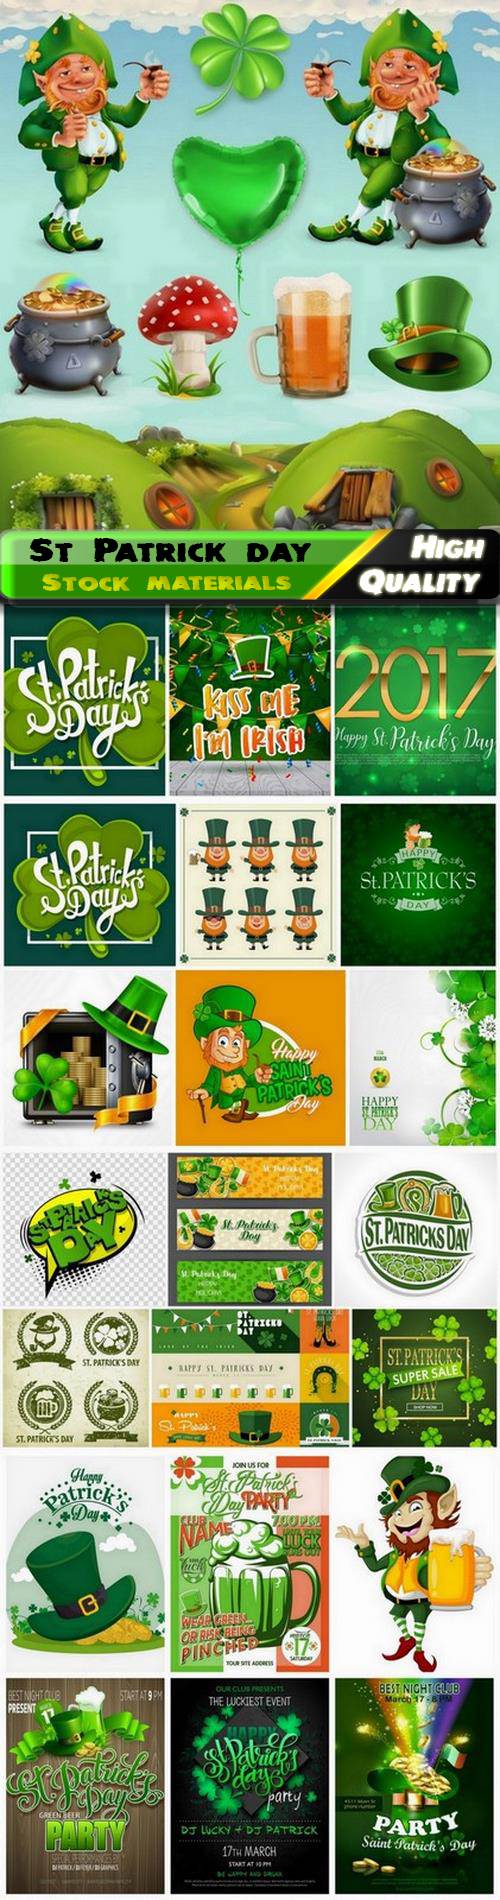 St Patrick day 17 march greeting card and banner 25 Eps